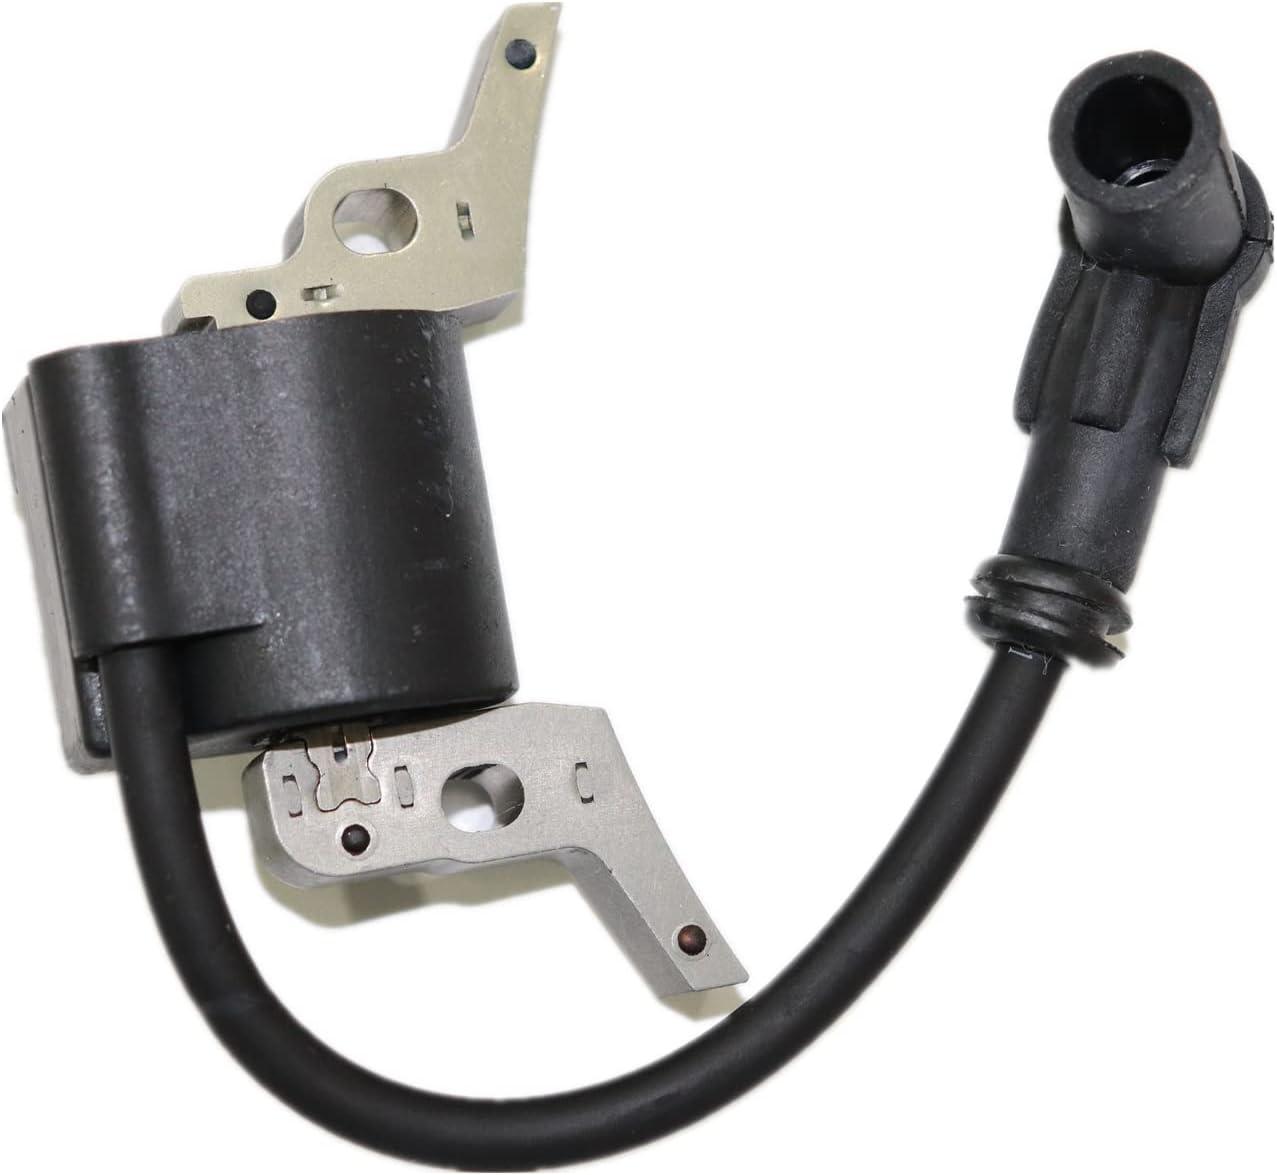 Hipa GA2111A Ignition Coil Compatible with Generac CH410 XG7000E XG8000E GP7000 XG8000 XP6500 XP8000 Cylinder Similar to 0G9241T - hipaparts